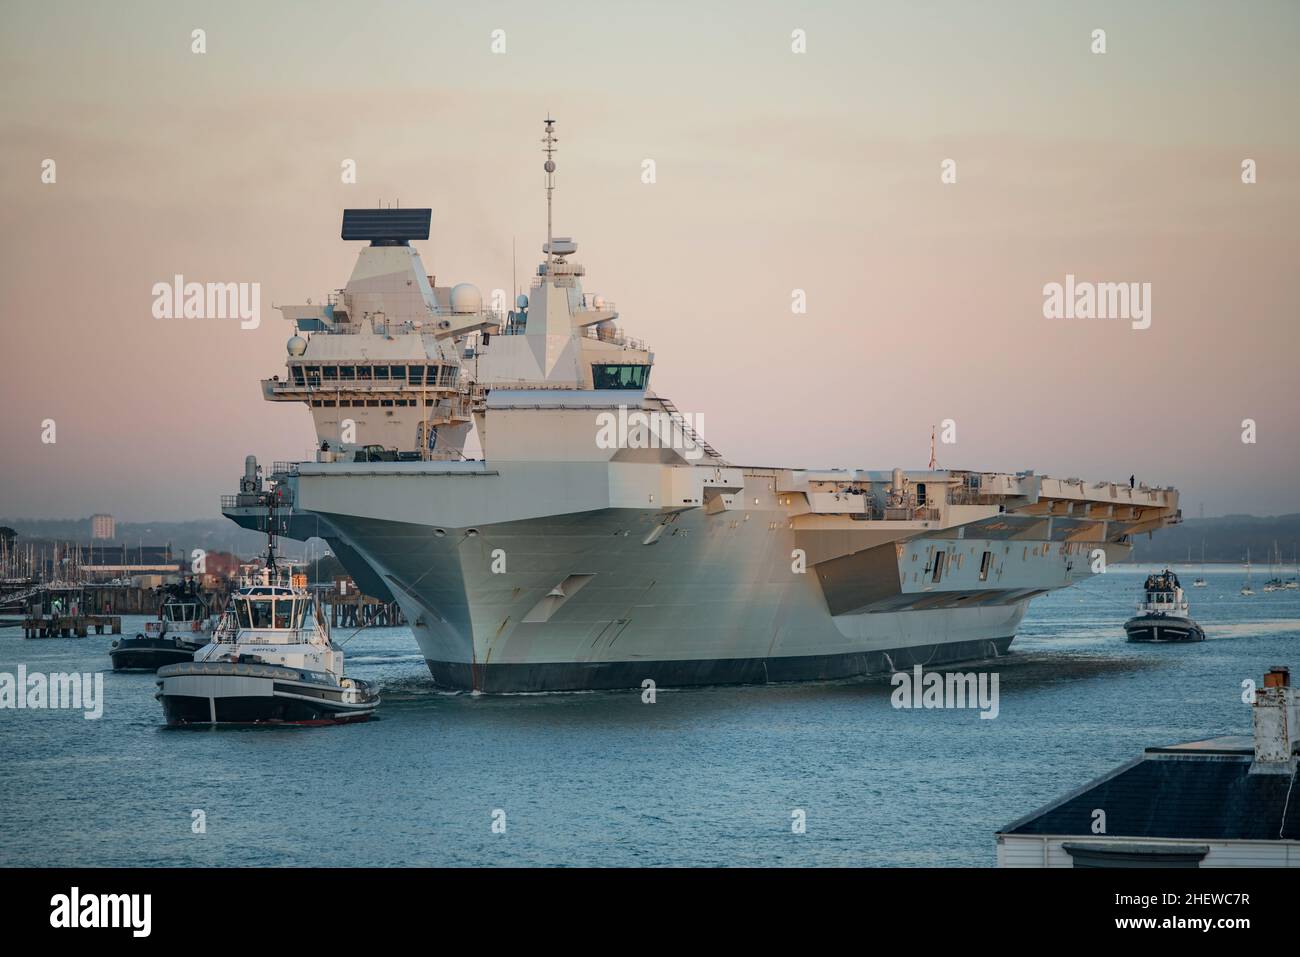 Royal Navy warship HMS Prince of Wales (R09) left Portsmouth Harbour, UK at sunrise on 12/1/22 to take over as flagship of the NATO Response Force. Stock Photo